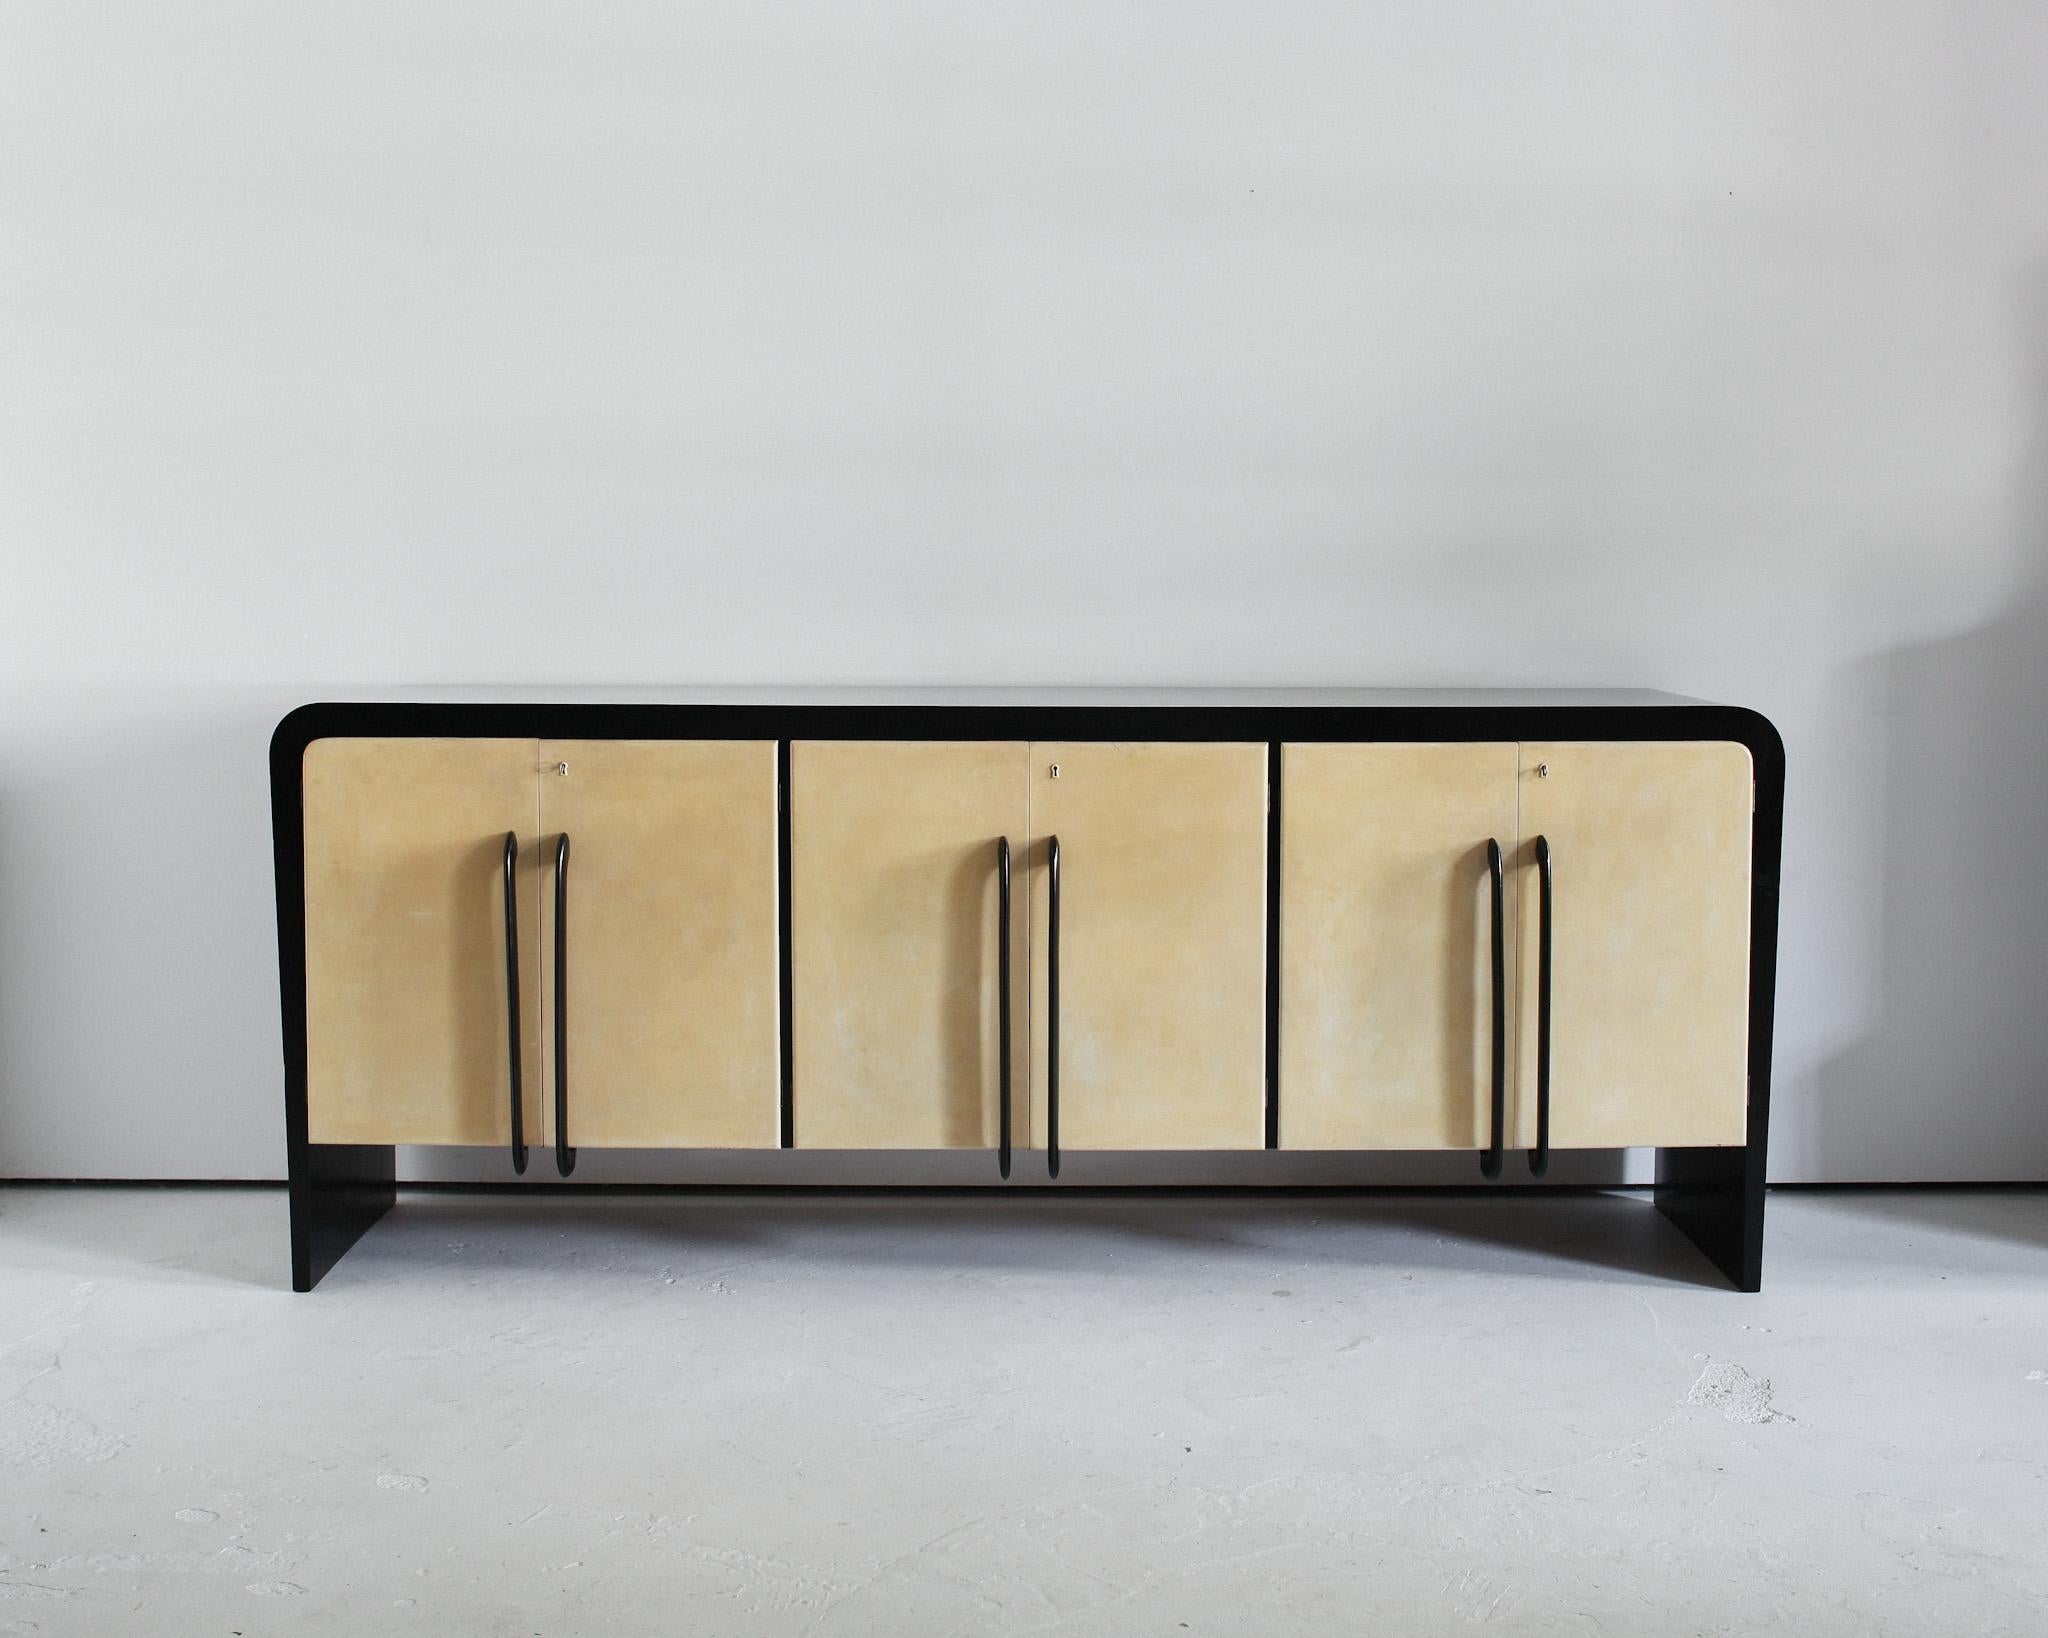 Large Italian Deco/Modernist Vellum Sideboard In Good Condition For Sale In London, GB